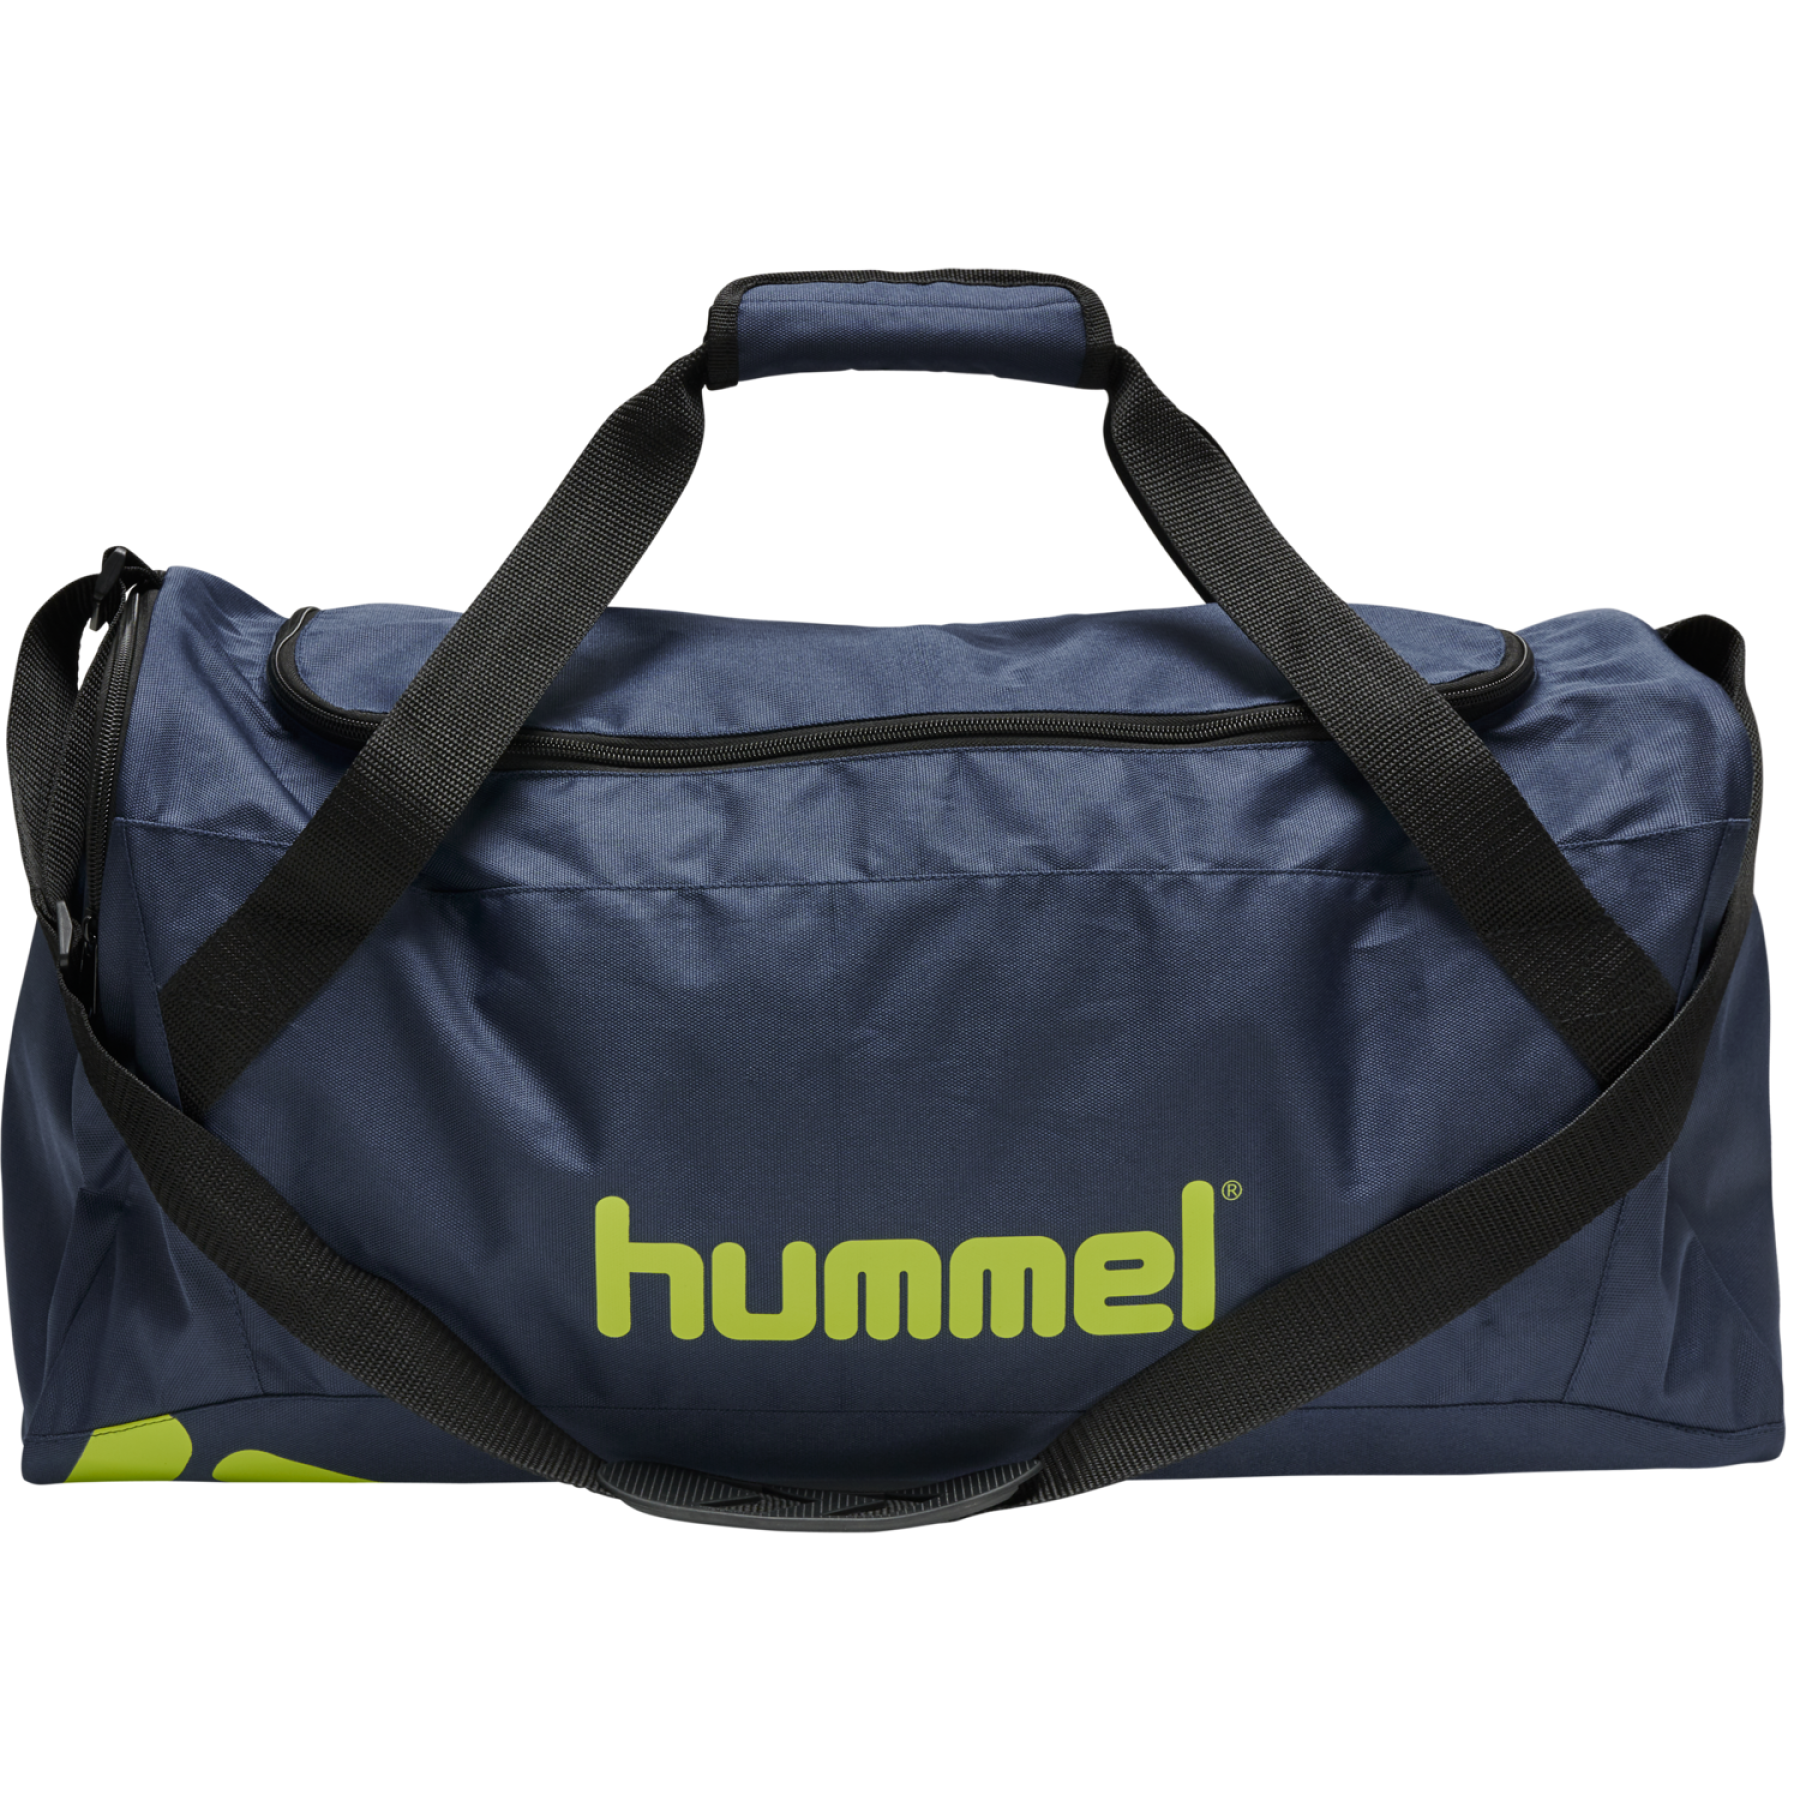 Sac à dos Hummel hmlPROMO - Bagagerie - Equipements - Running